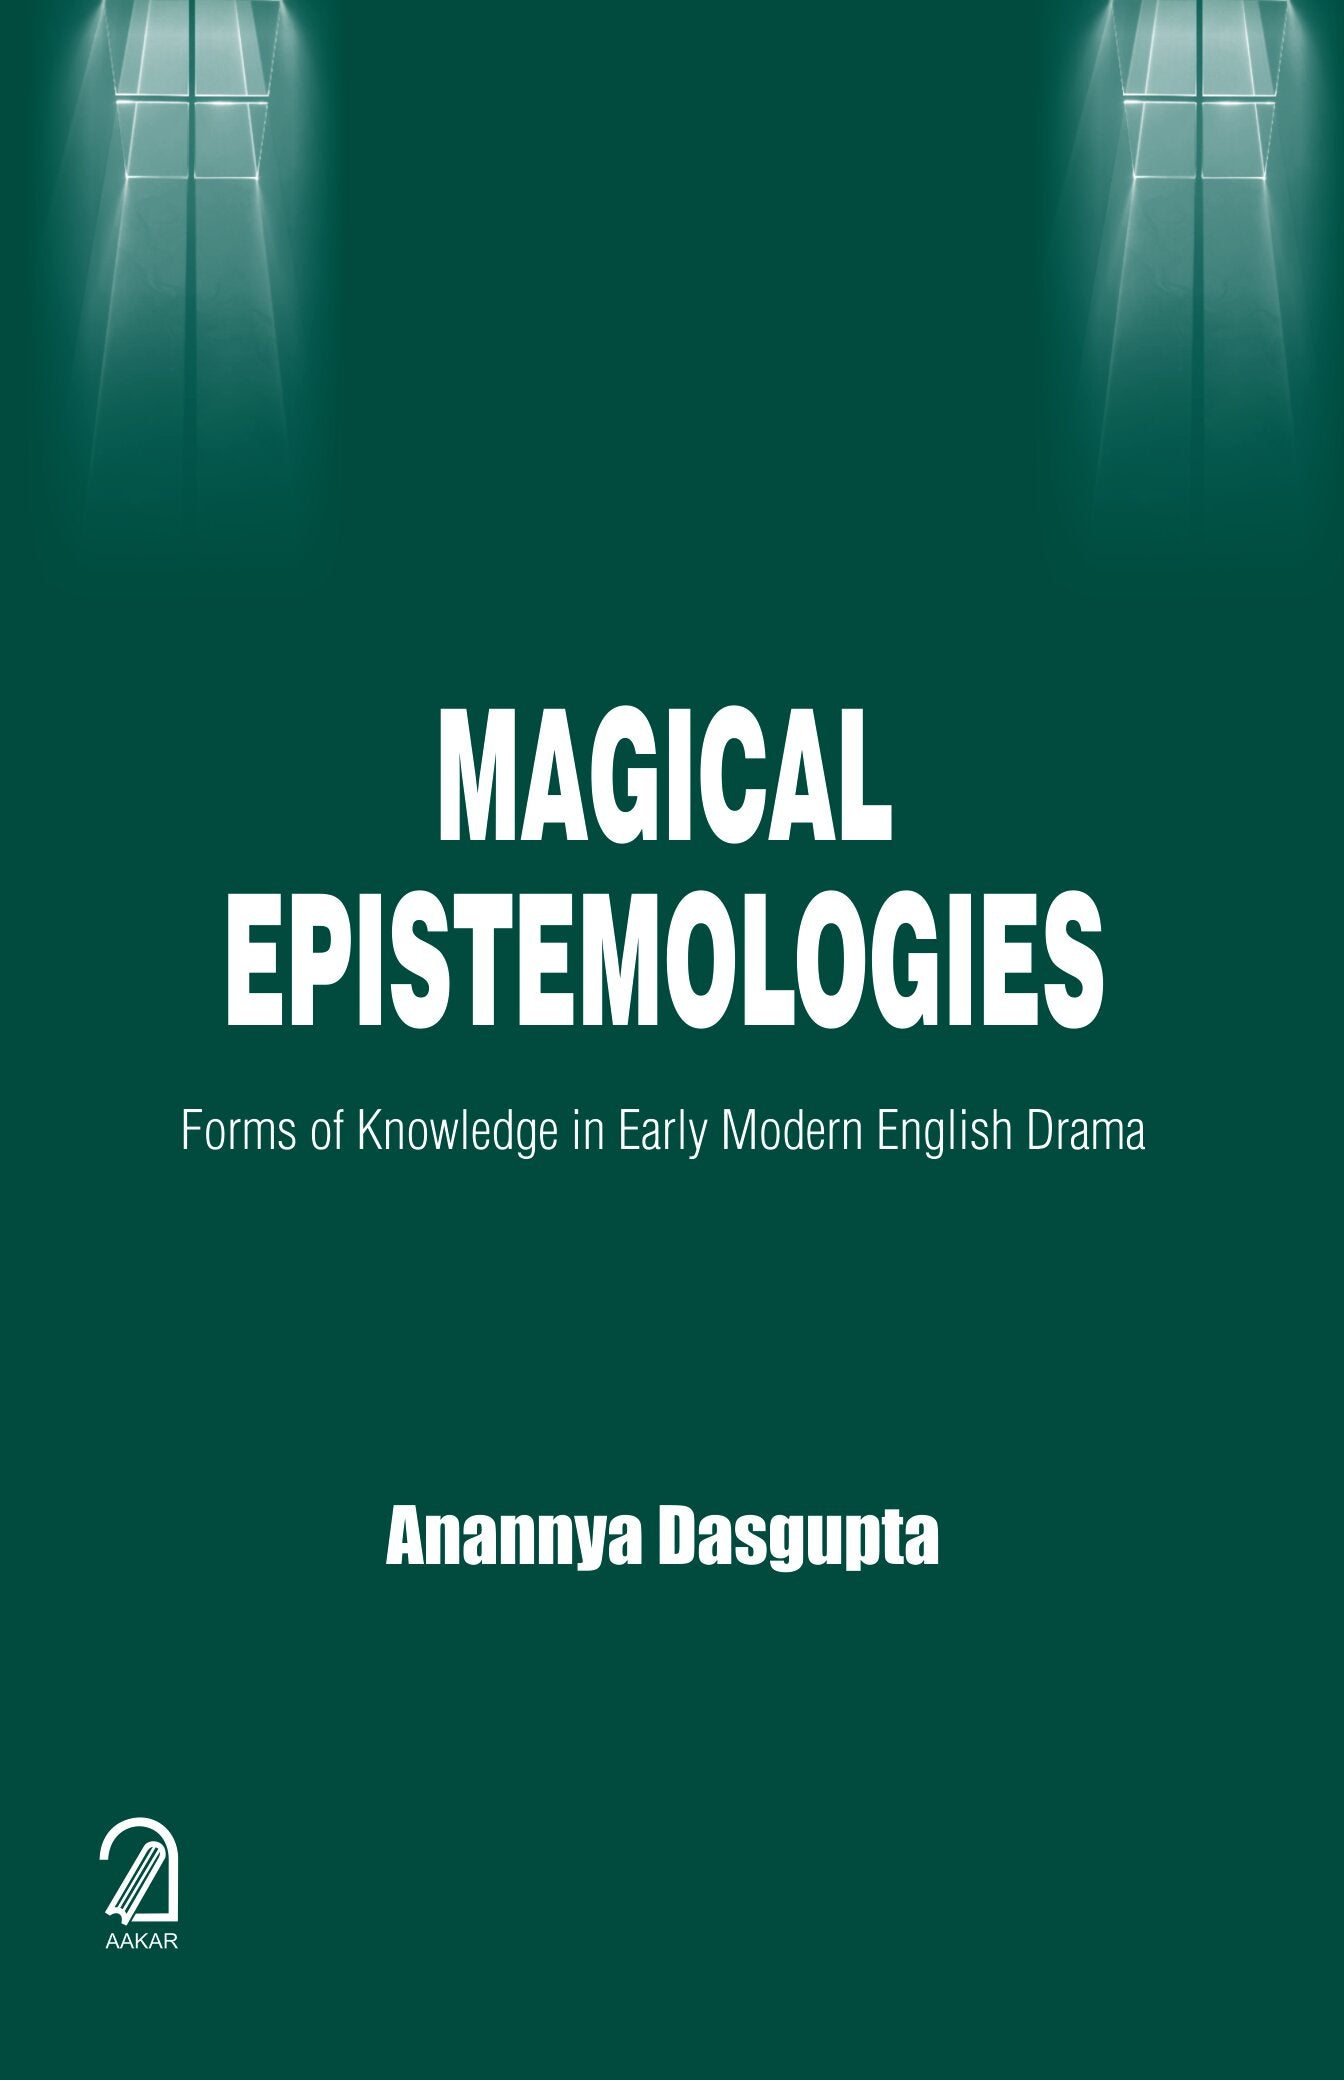 Magical Epistemologies: Forms of Knowledge in Early Modern English Drama